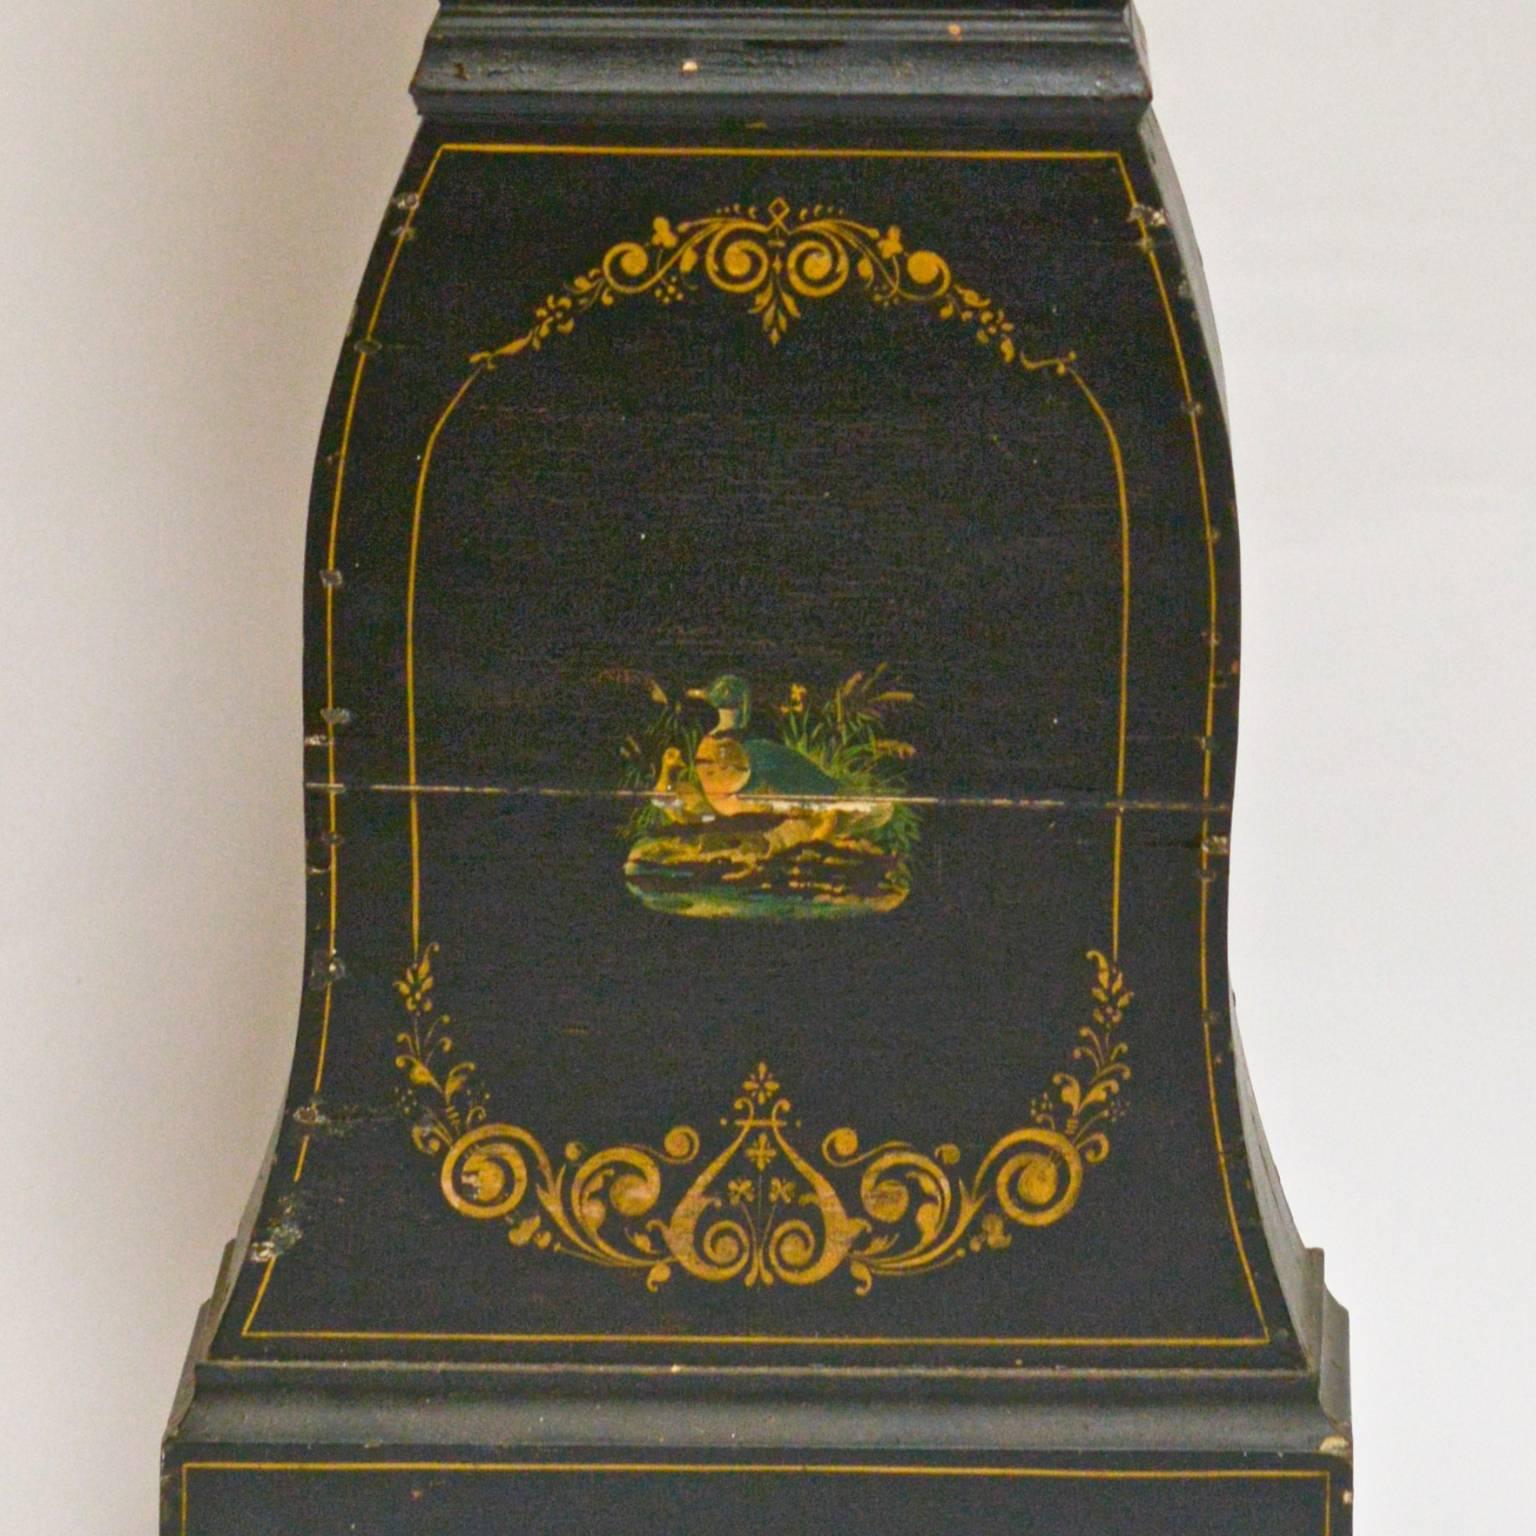 Gustavian Swedish Mora Clock Black and Gold Carved Detail Hand-Painted Early 1800s